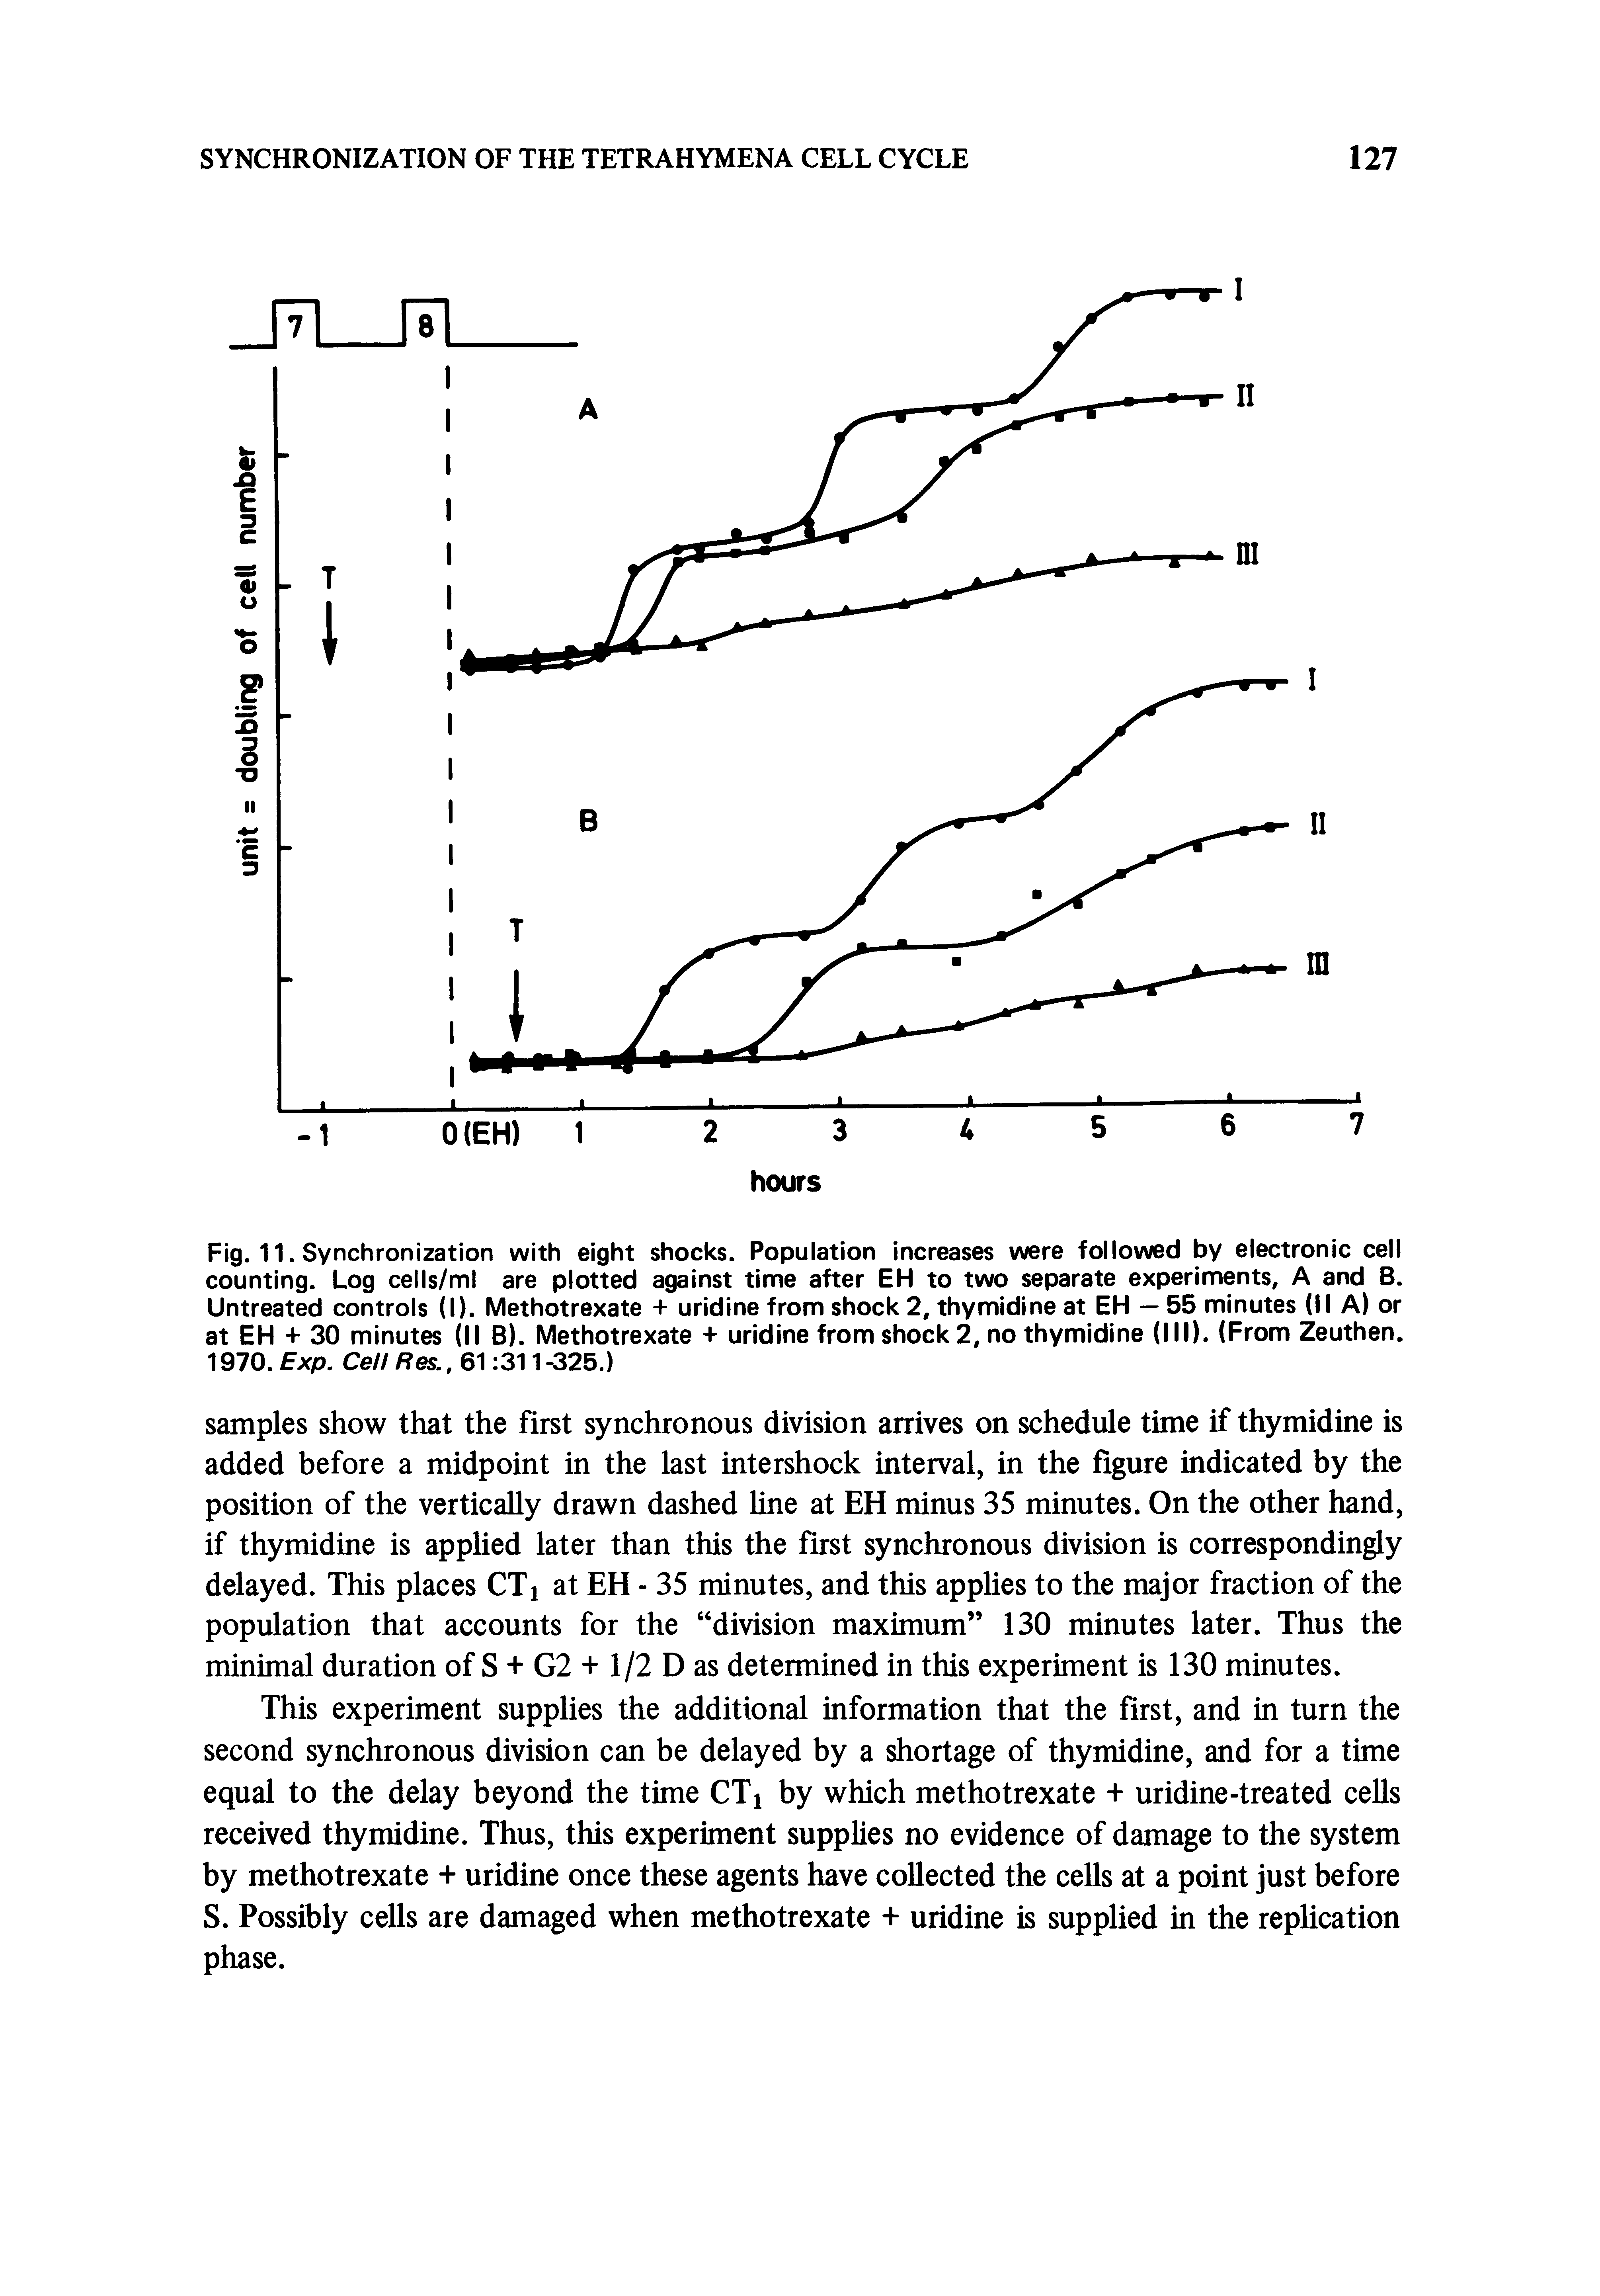 Fig. 11. Synchronization with eight shocks. Population increases were followed by electronic cell counting. Log cells/ml are plotted against time after EH to two separate experiments, A and B. Untreated controls (I). Methotrexate + uridine from shock 2, thymidine at EH — 55 minutes (II A) or at EH + 30 minutes (II B). Methotrexate + uridine from shock 2, no thymidine (III). (From Zeuthen. 1970. Exp. Cell Res.. 61 311 -325.)...